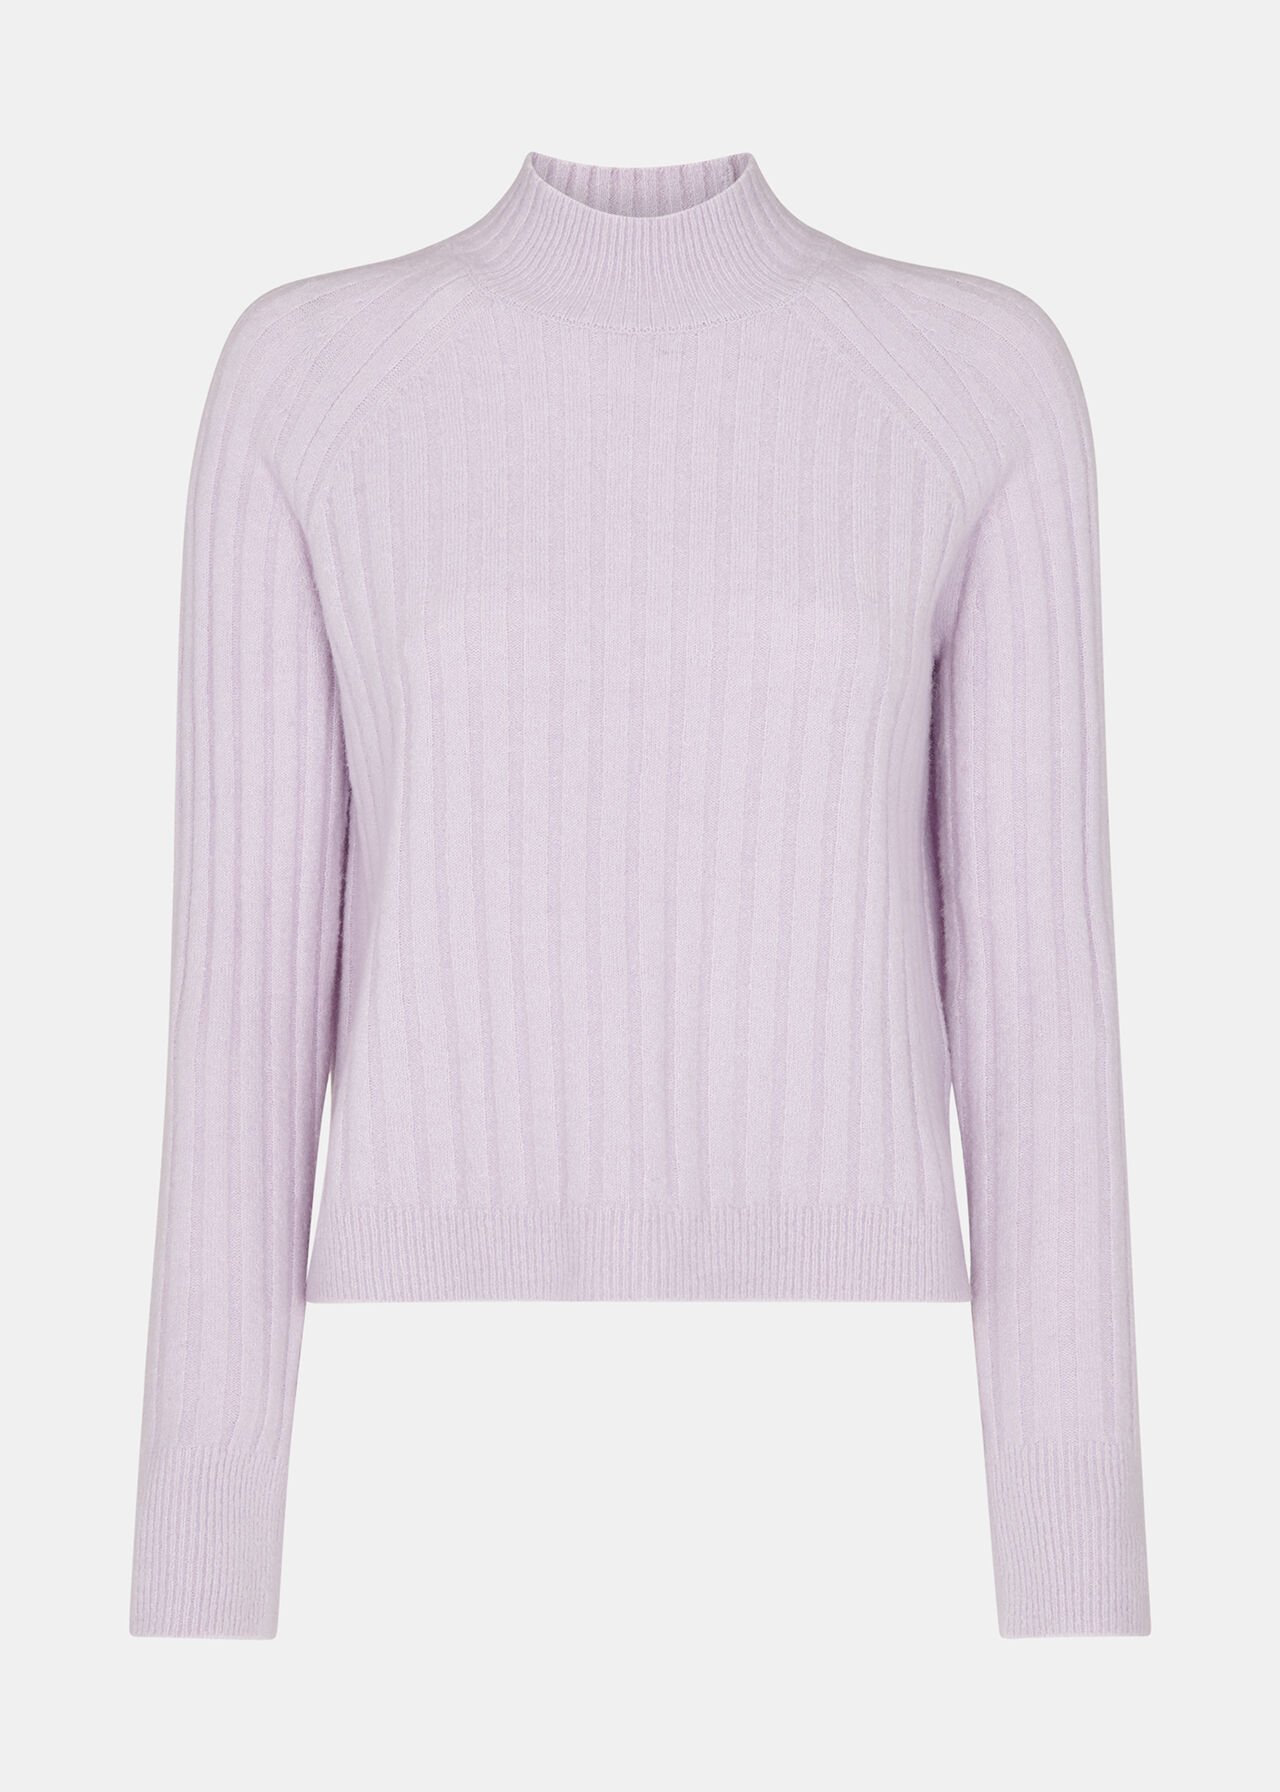 Lilac Ribbed Sponge Knit | WHISTLES